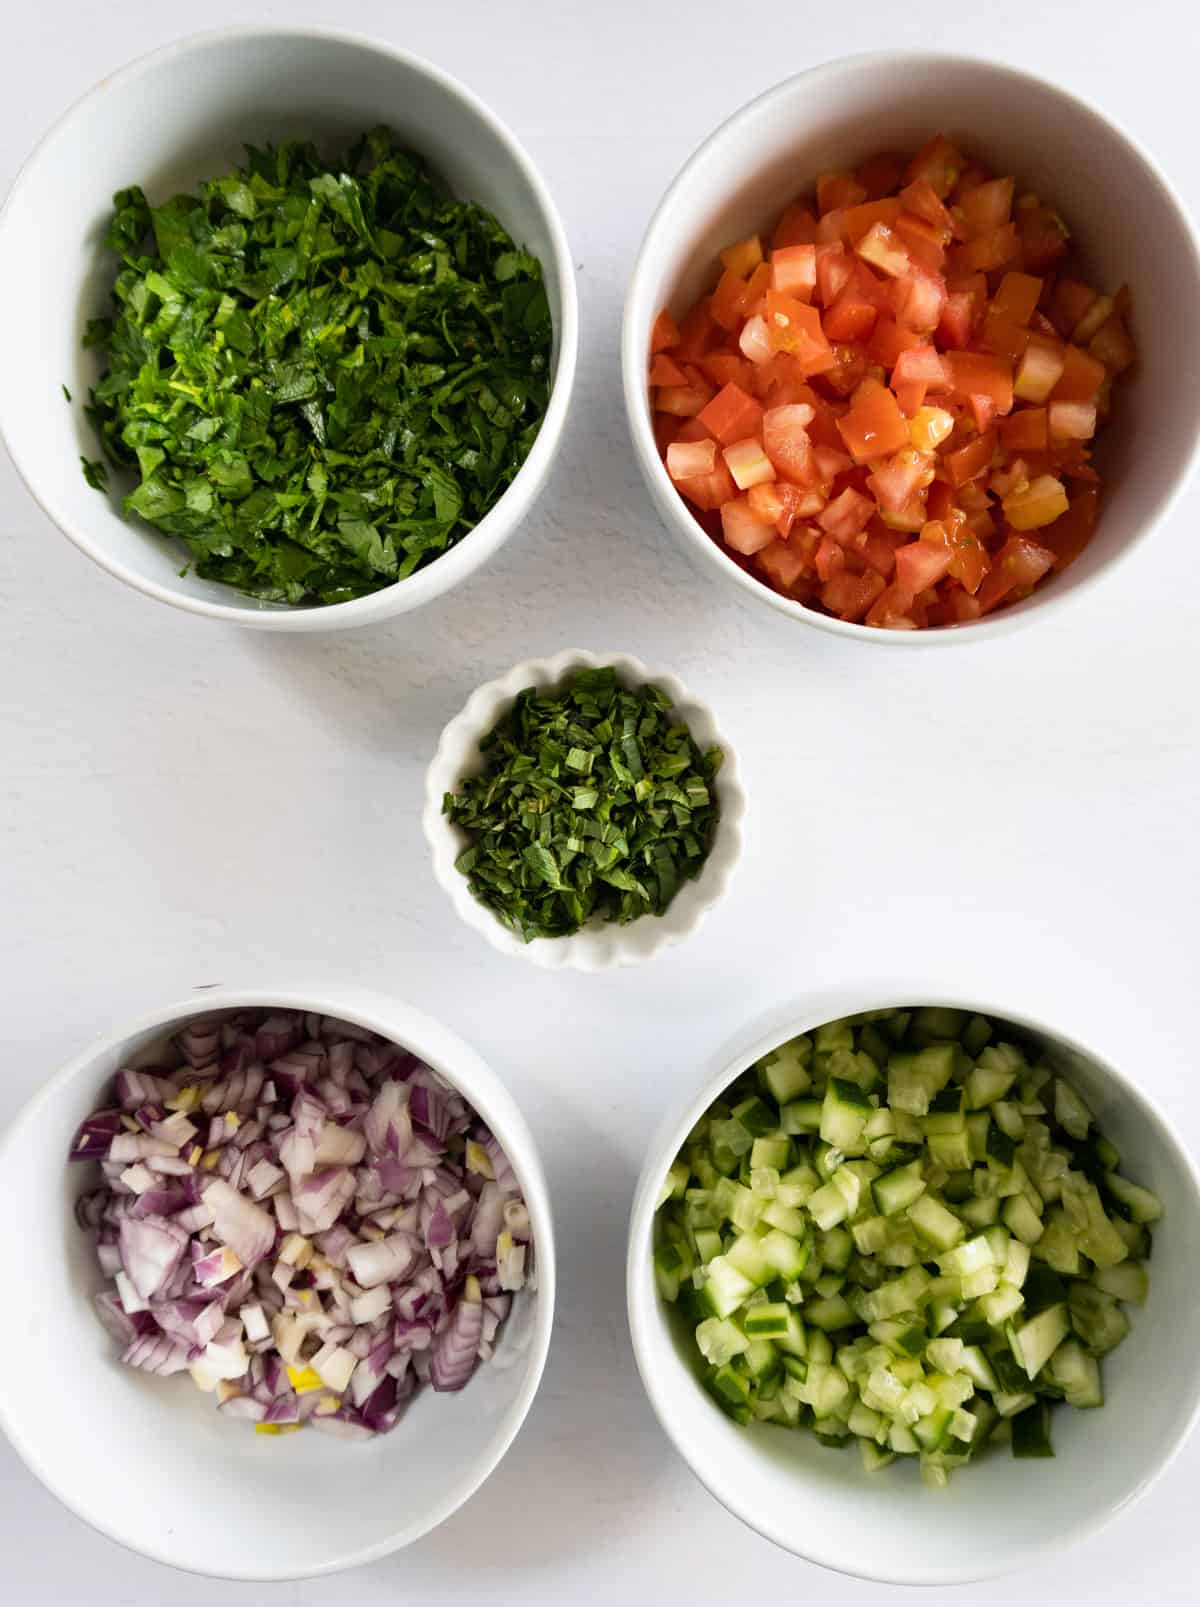 tomato, parsley, onion, mint leaves and cucumber all finely chopped in white bowls